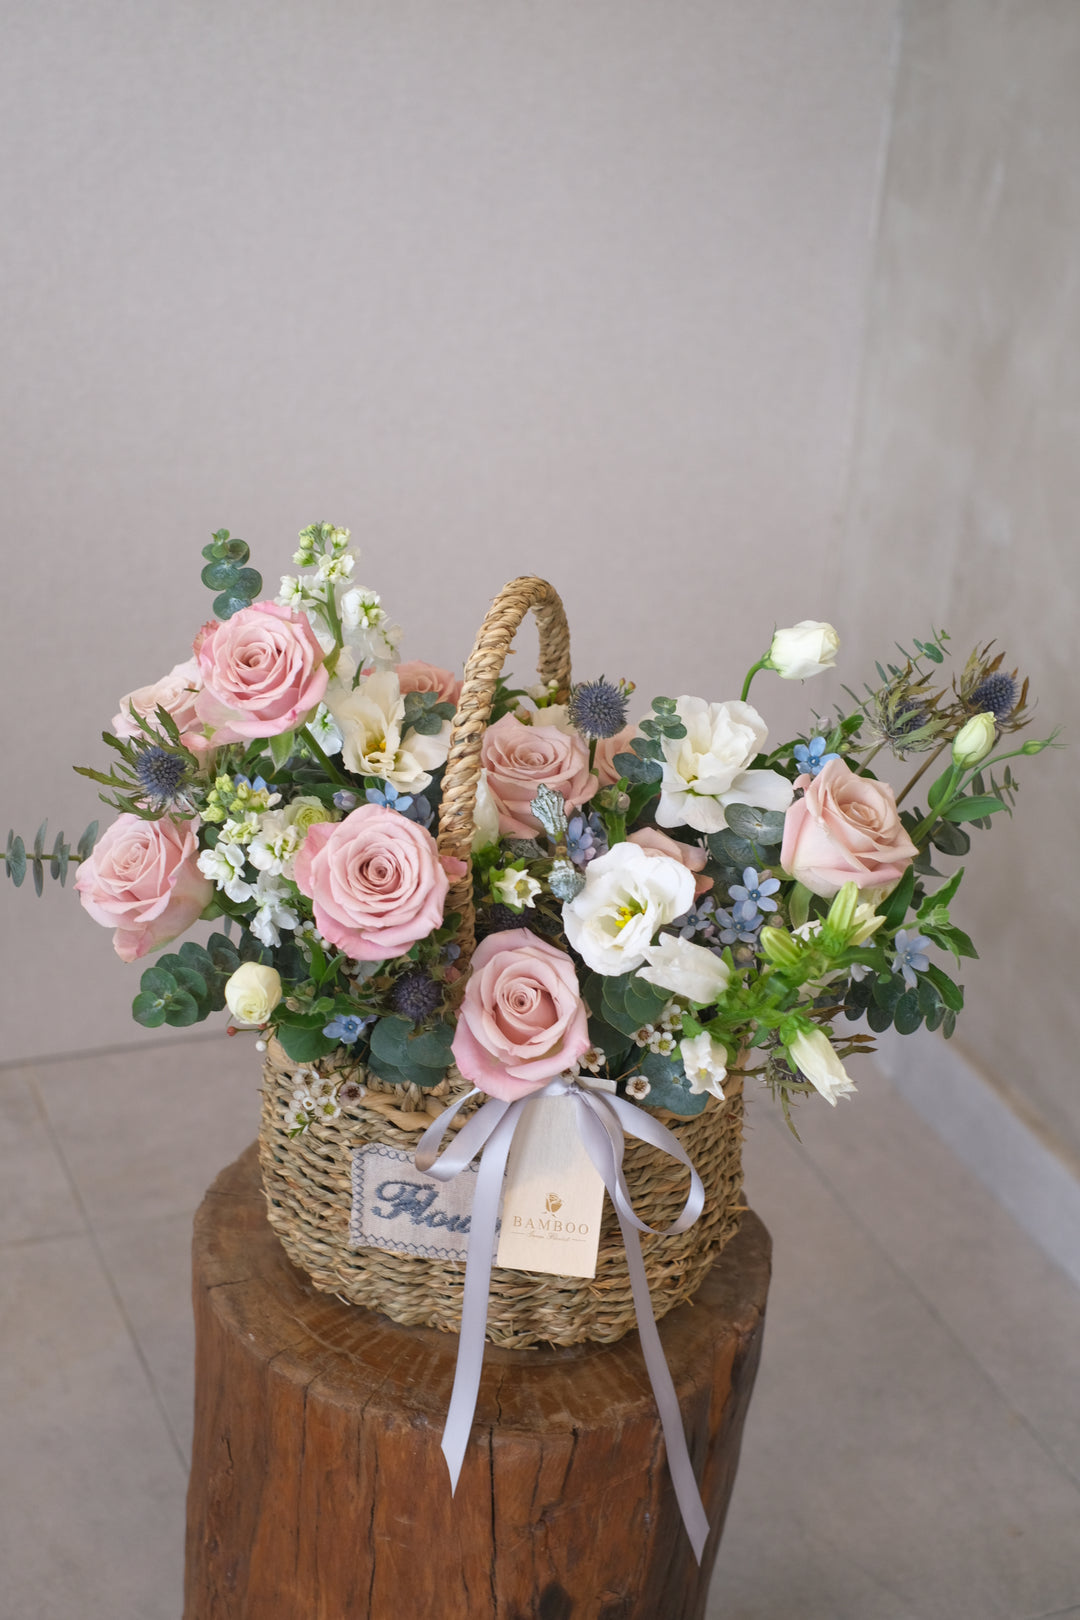 "A wicker basket filled with an assortment of fresh, vibrant blooms, reflecting serenity and beauty."